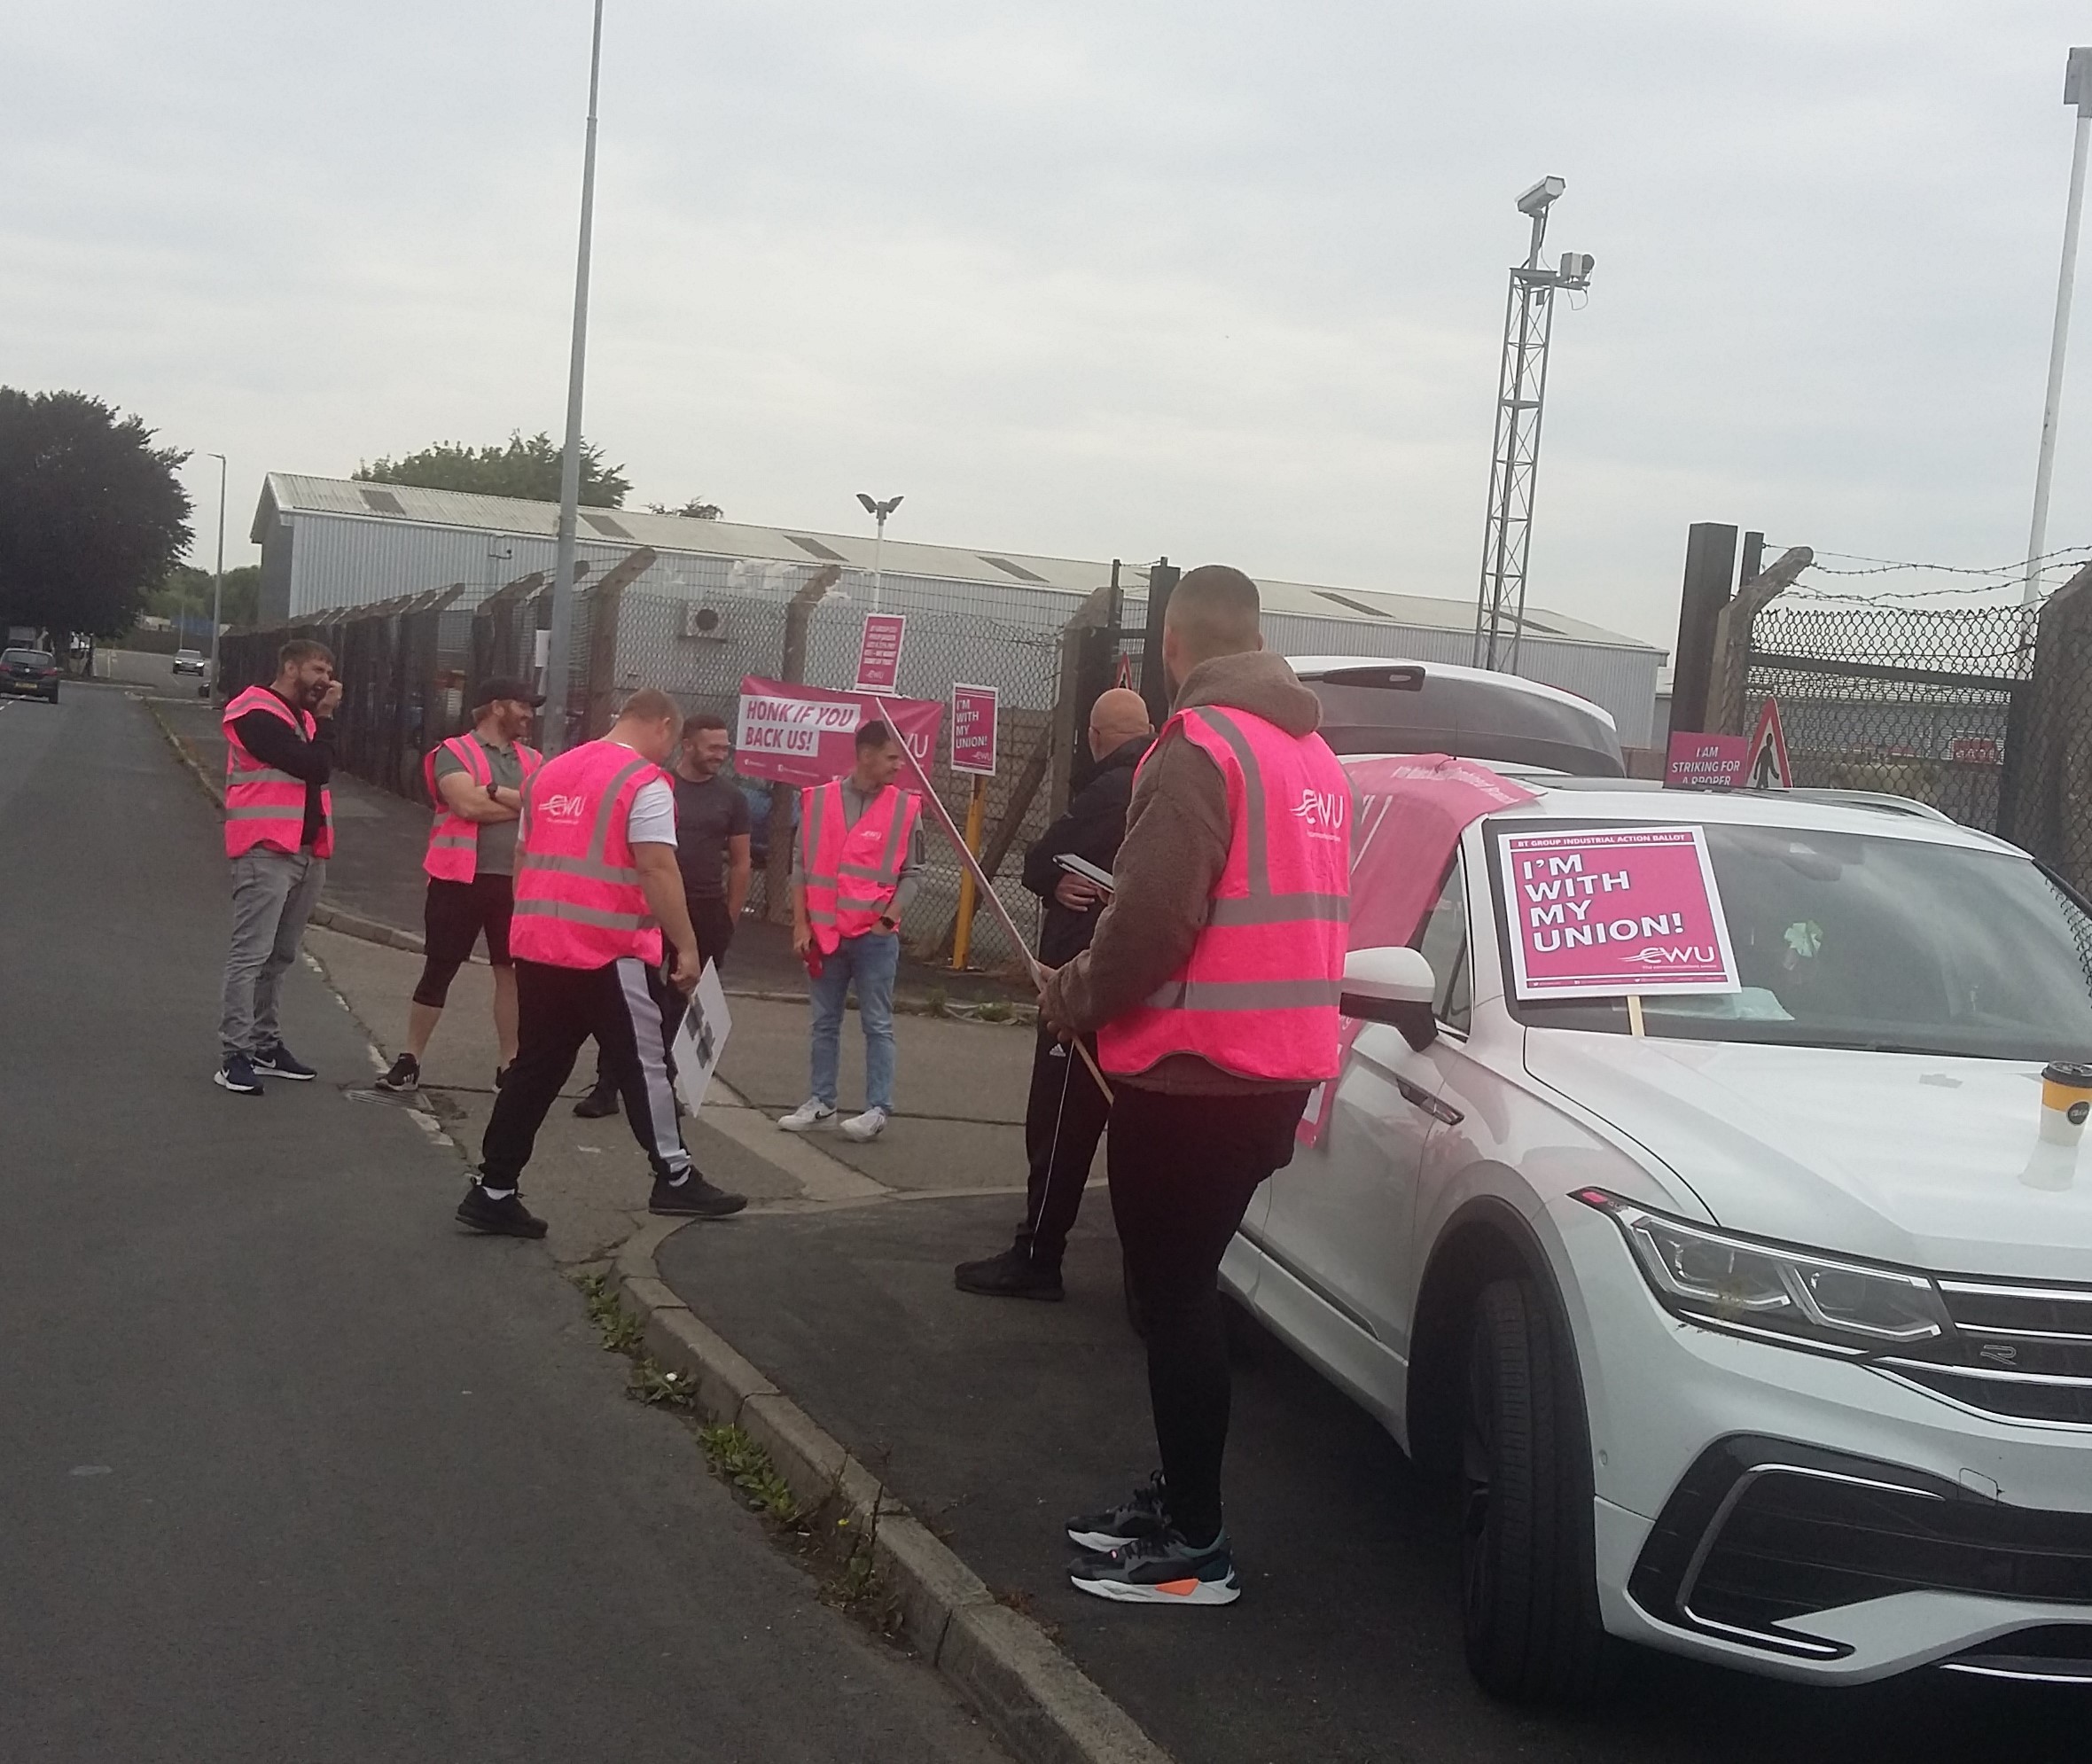 CWU members picket at the BT Openreach Hartford Way Transport Depot off Bumpers Lane, Chester, in a pay dispute.